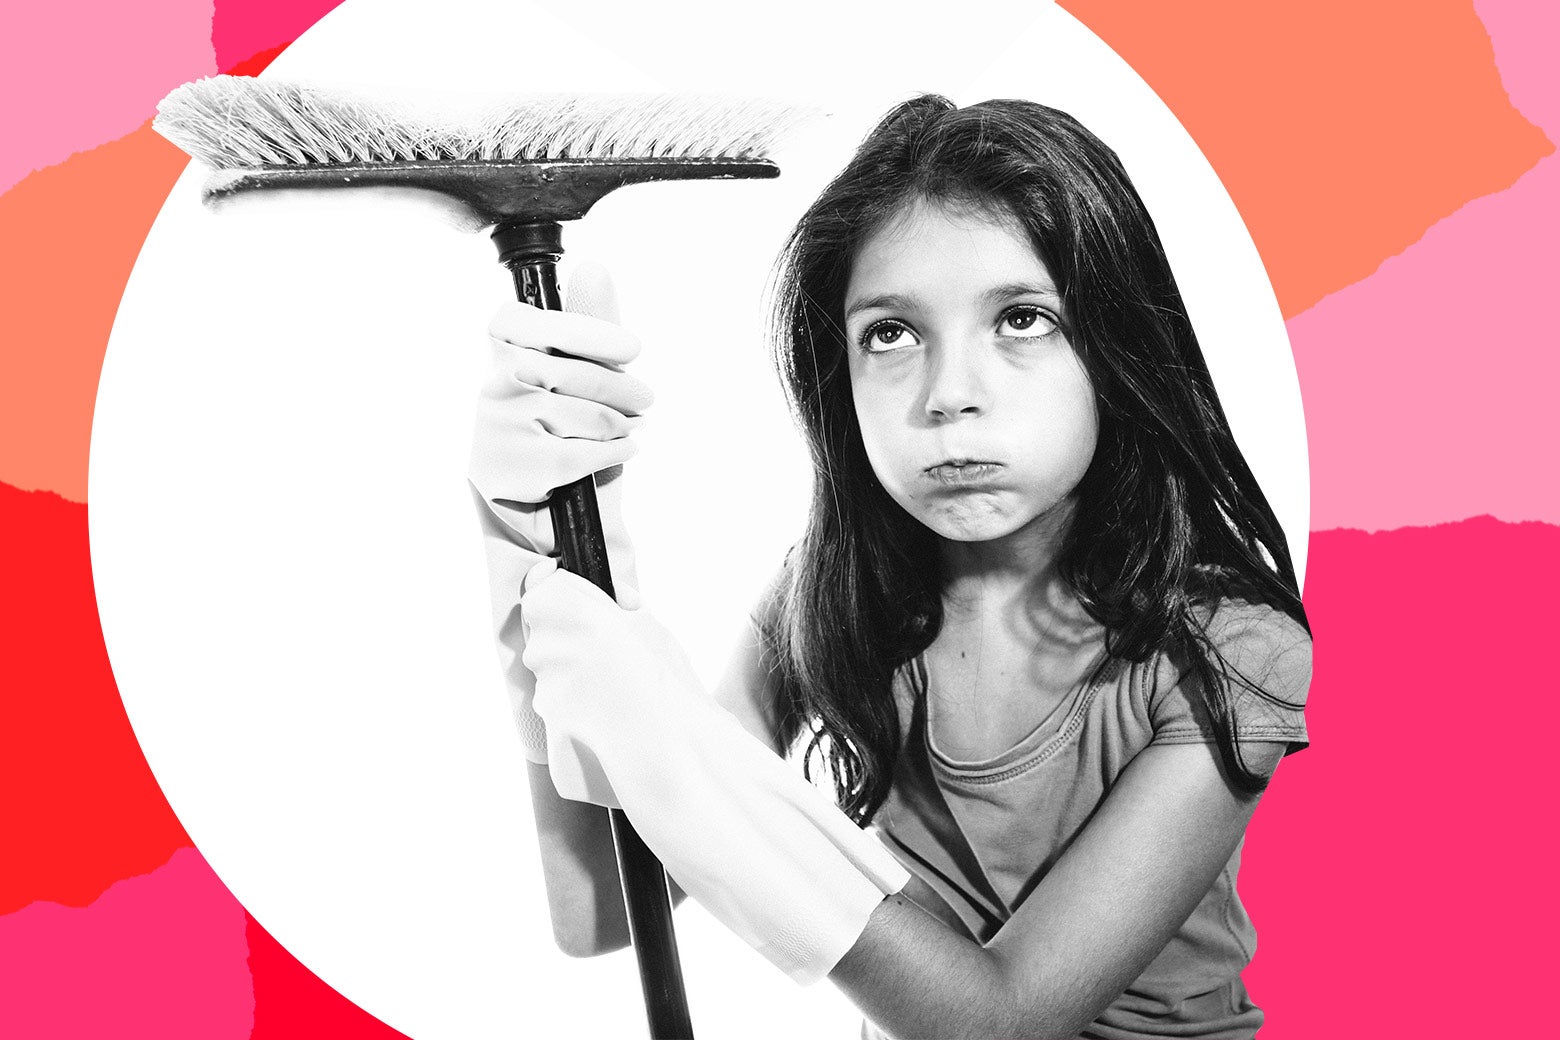 Girl with broom looking unhappy.